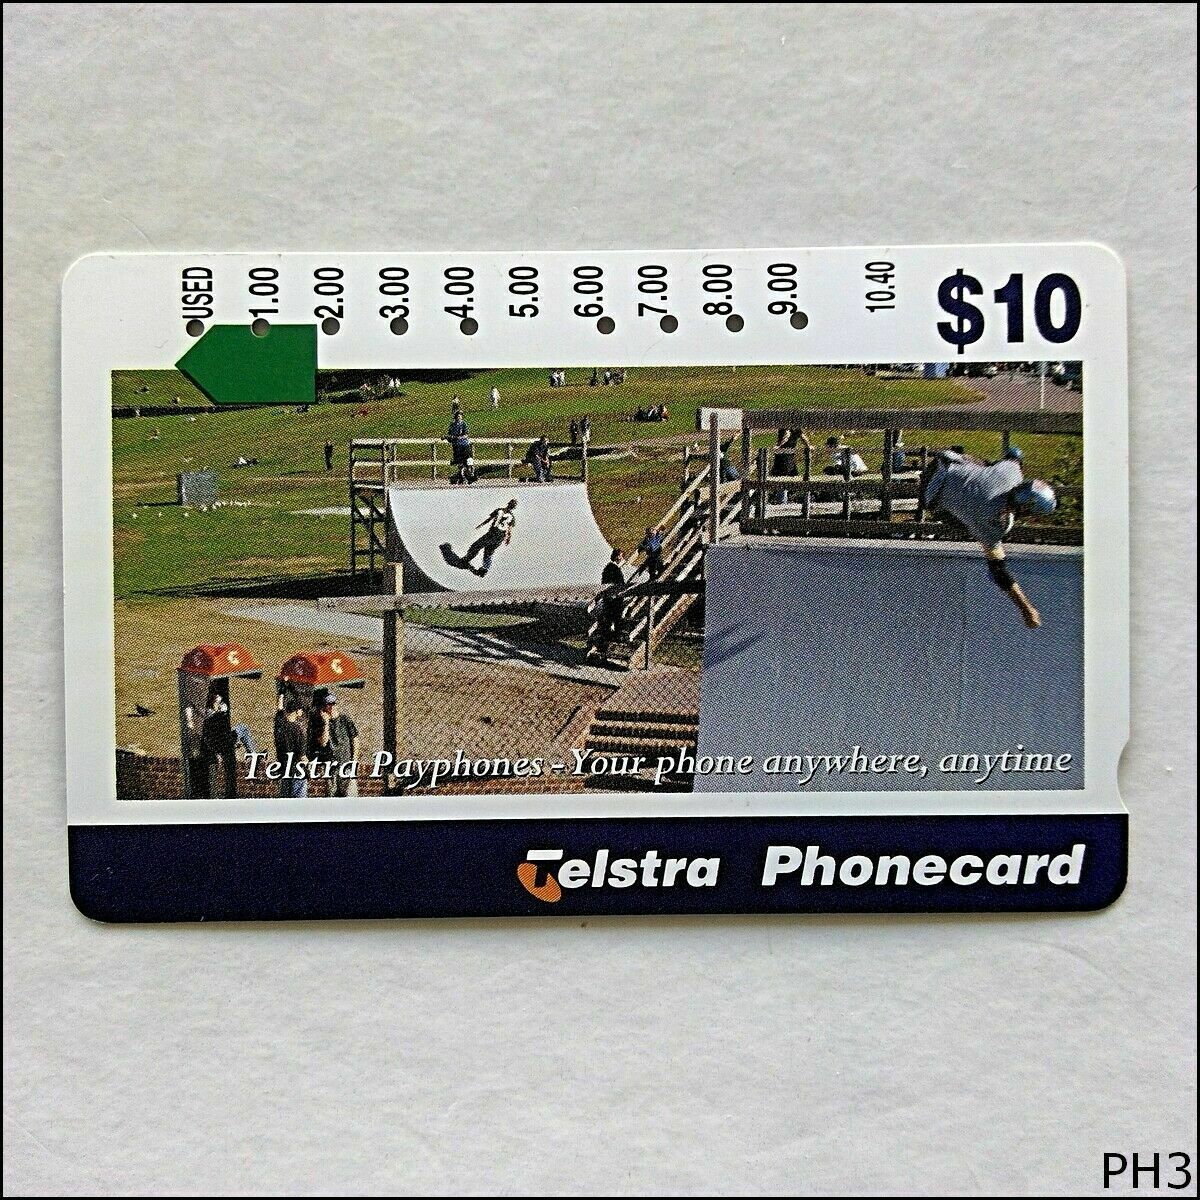 Telstra Payphones A964223a 1249 $10 Phonecard (PH3)